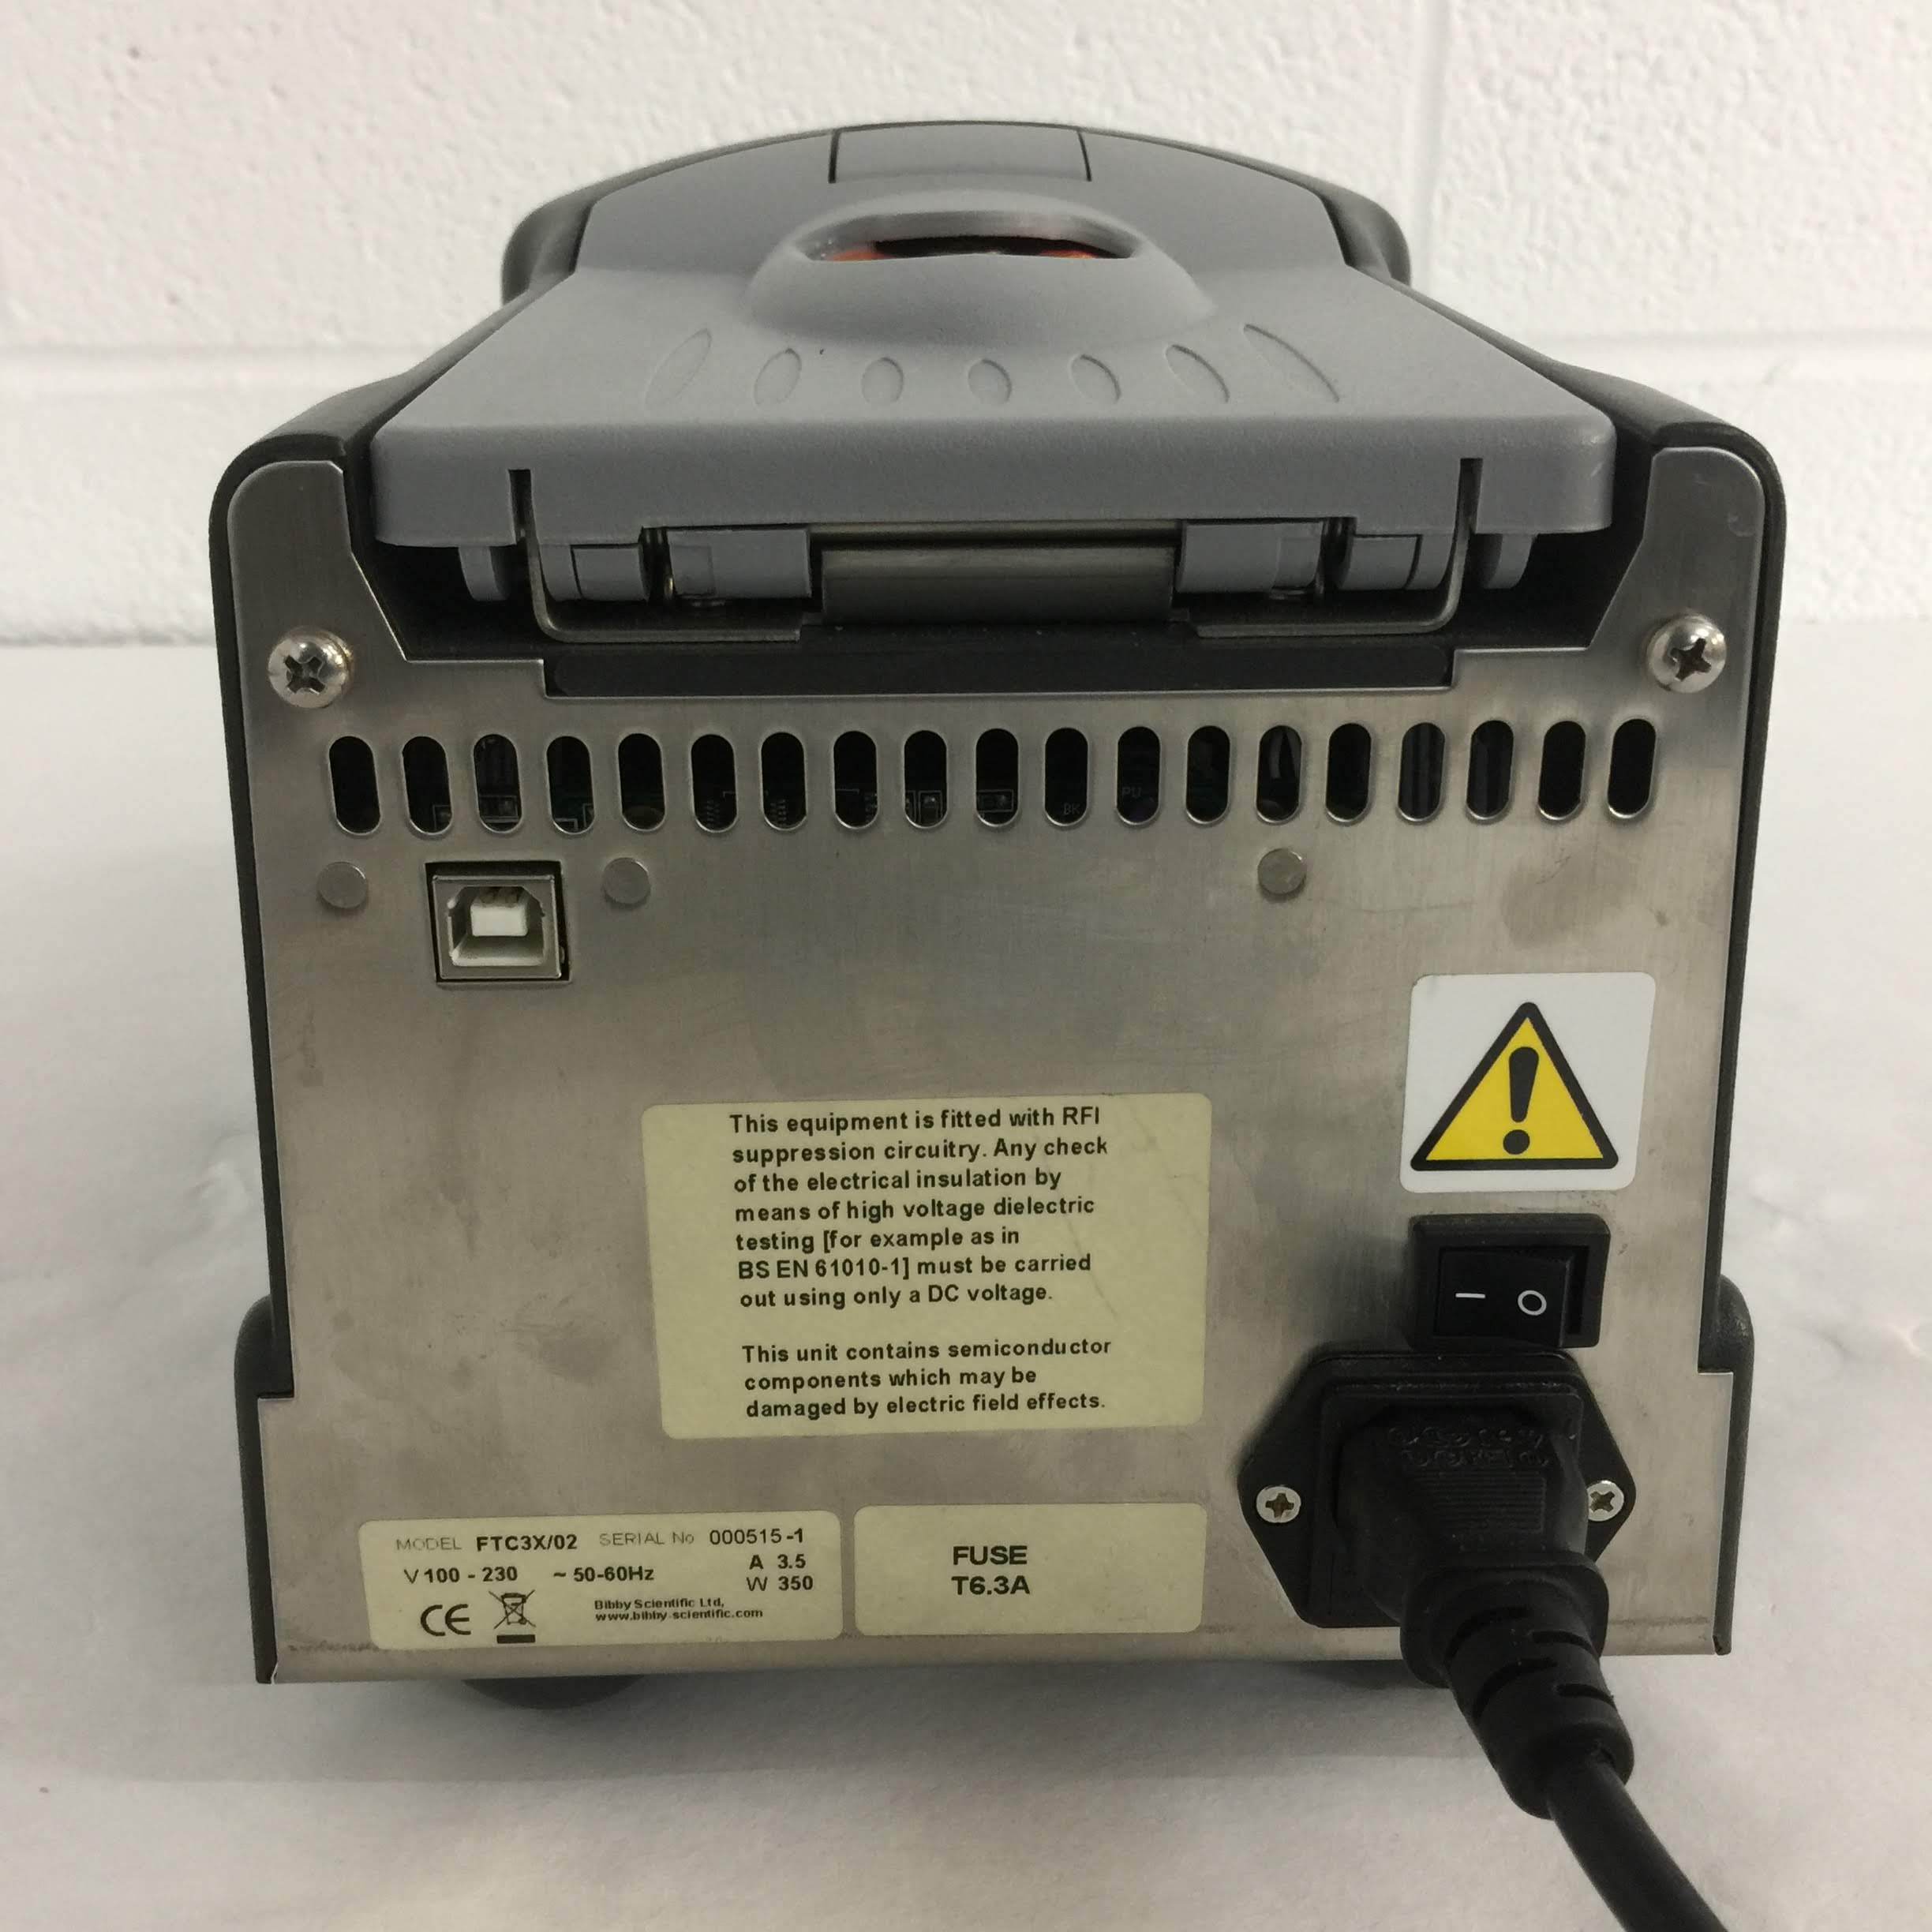 techne tc3000x thermocycler